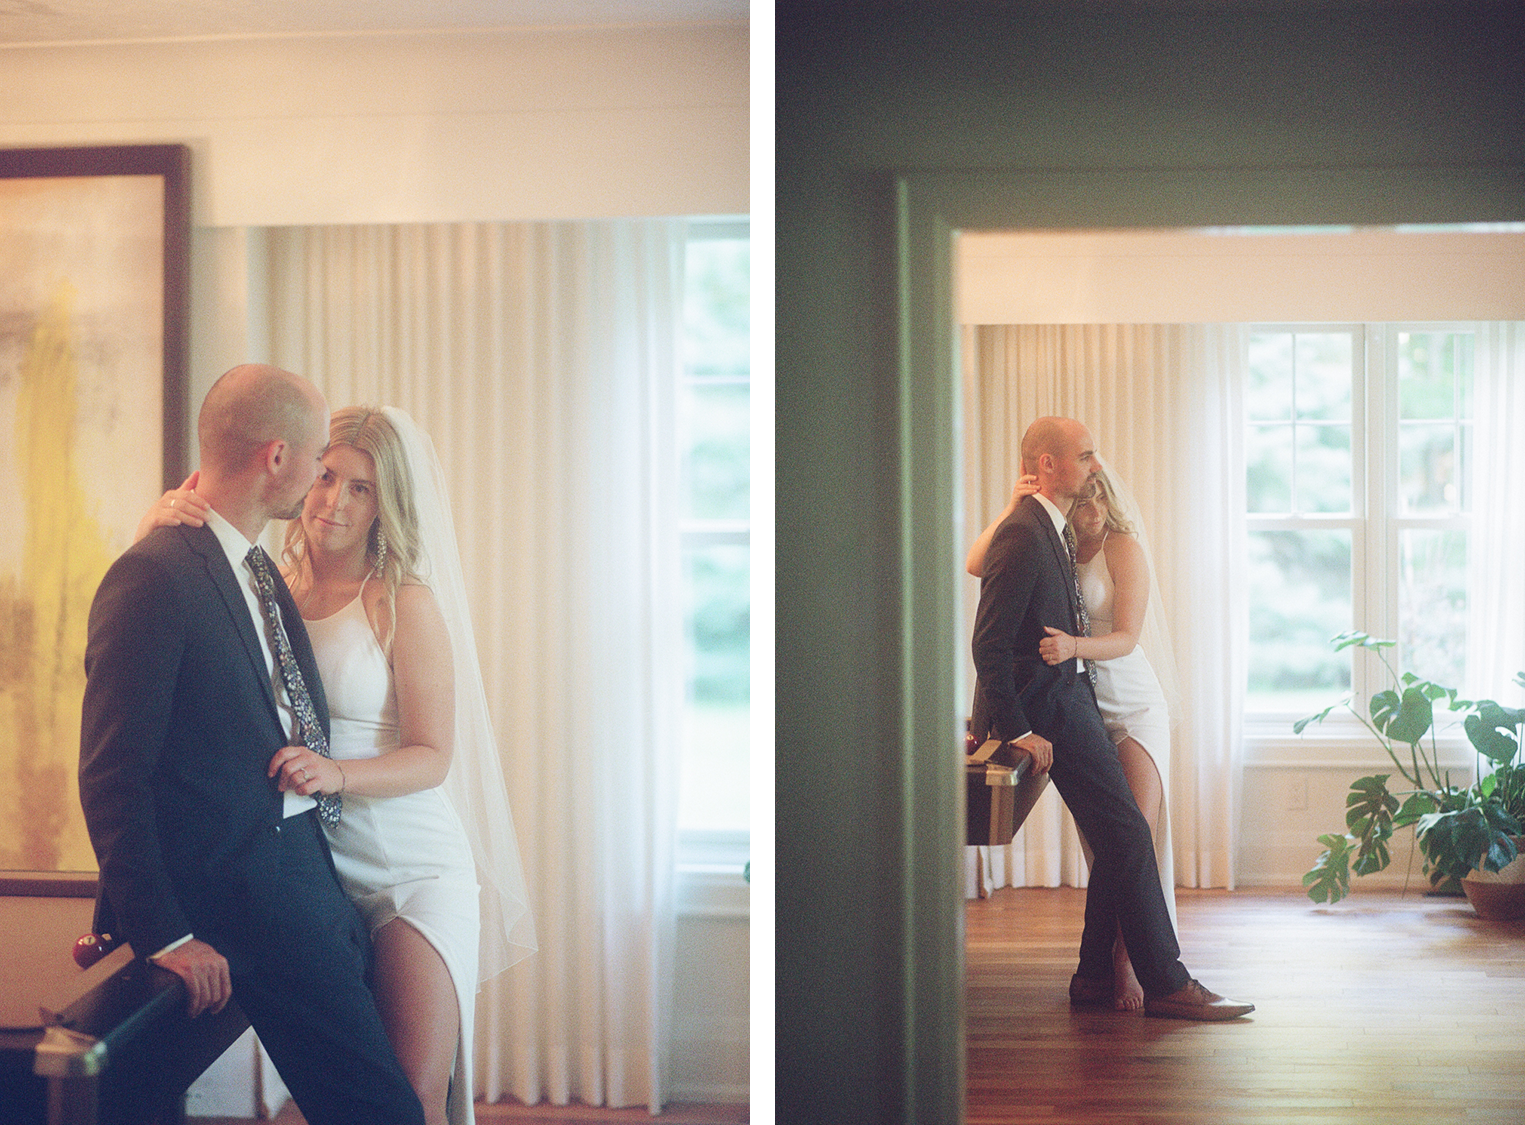 Backyard-Elopement-on-Film-Analog-Pool-Party-75.PNG